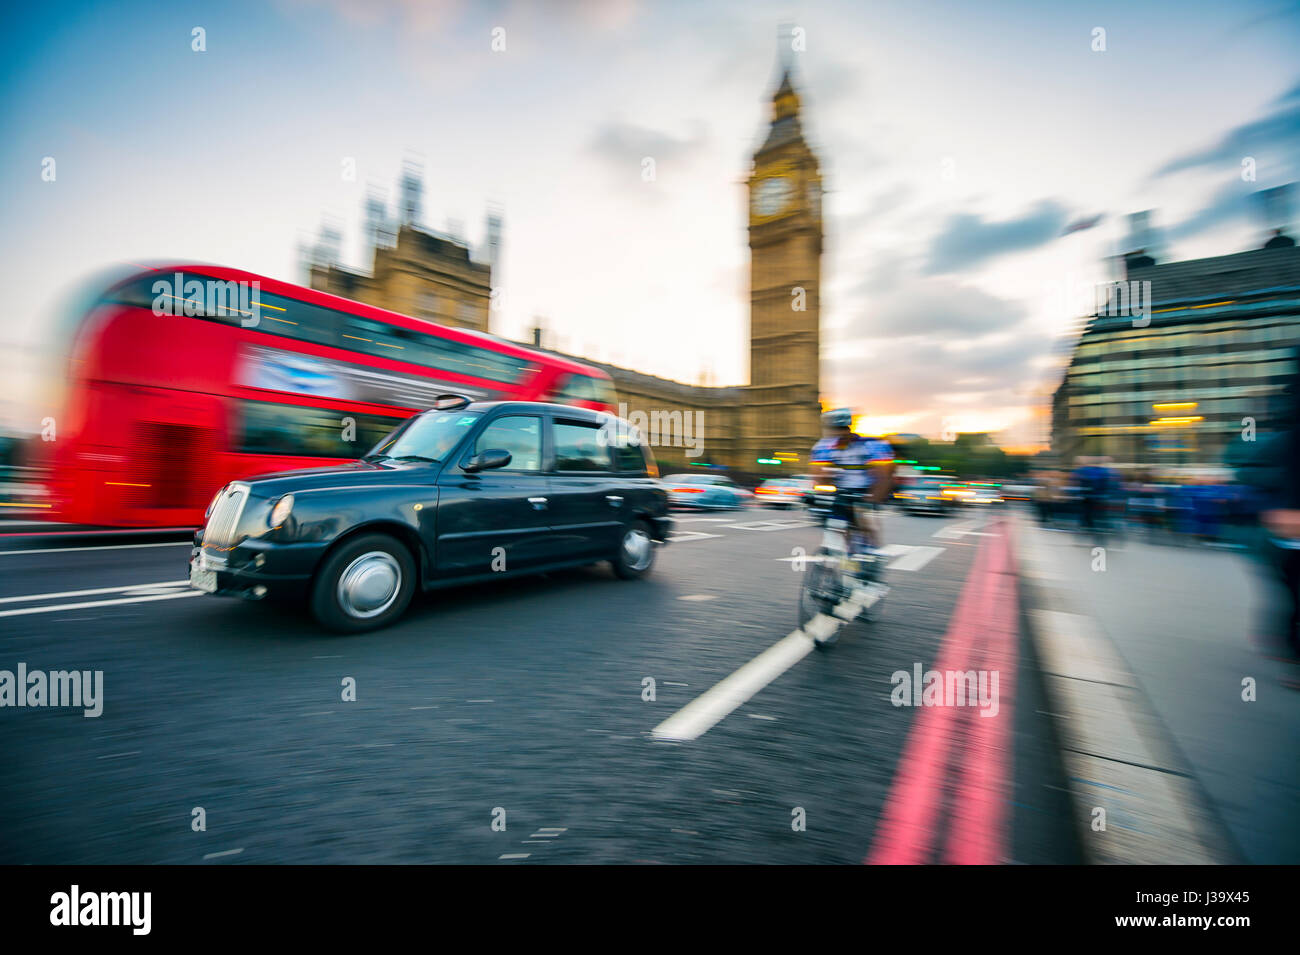 LONDON - OCTOBER 4, 2016: Traffic passes in motion blur on Westminster Bridge, a busy crossing that passes next to Houses of Parliament and Big Ben. Stock Photo